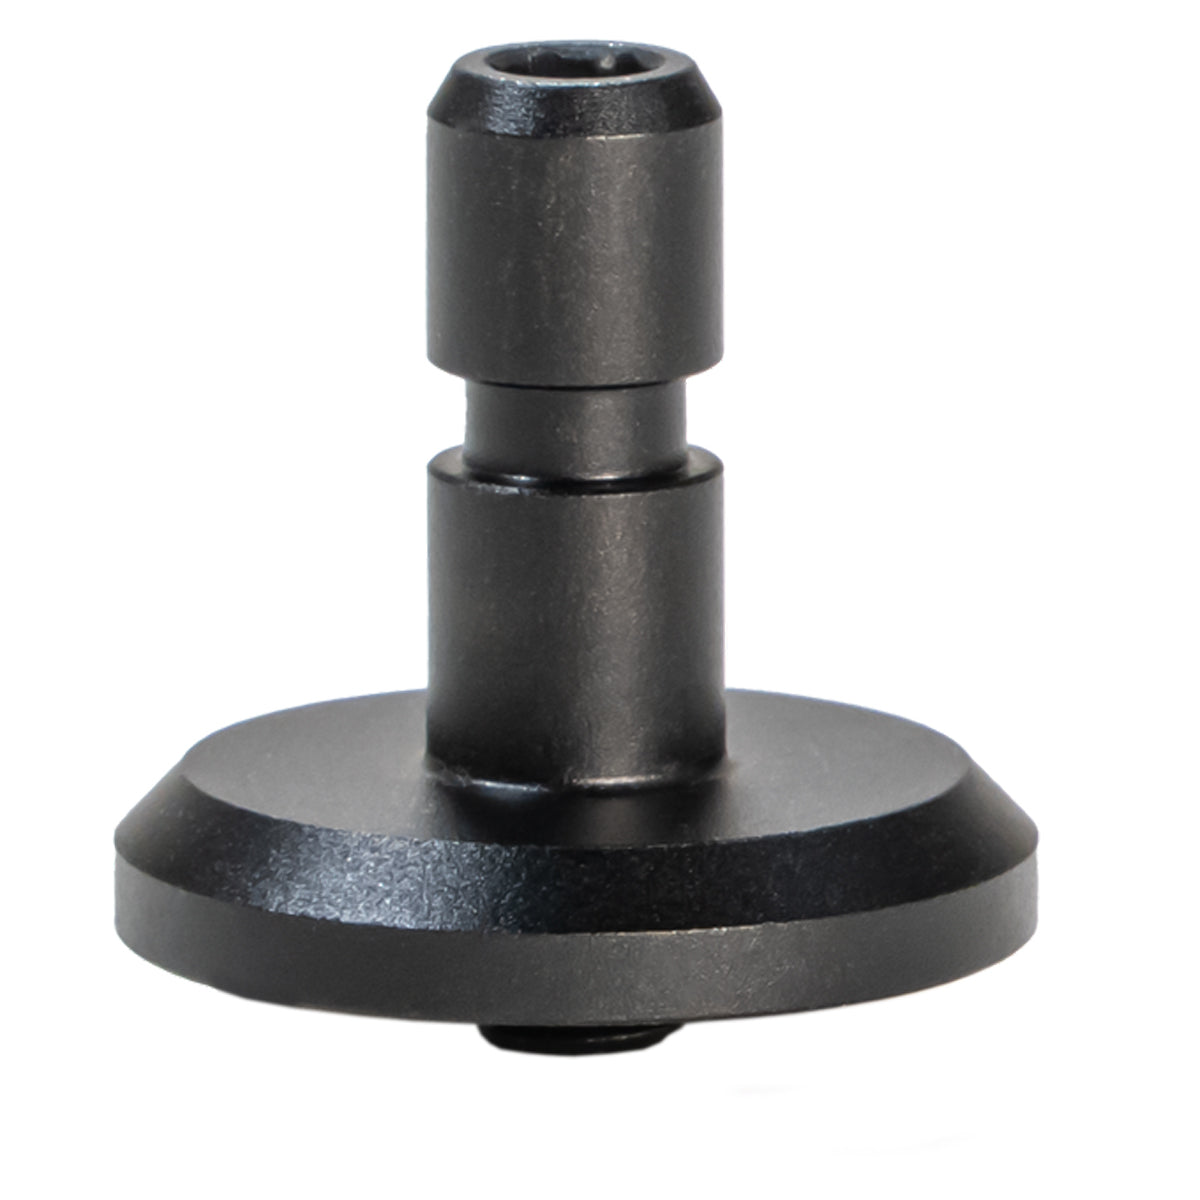 Revic MS1 Binocular Mounting Stud in  by GOHUNT | Revic - GOHUNT Shop